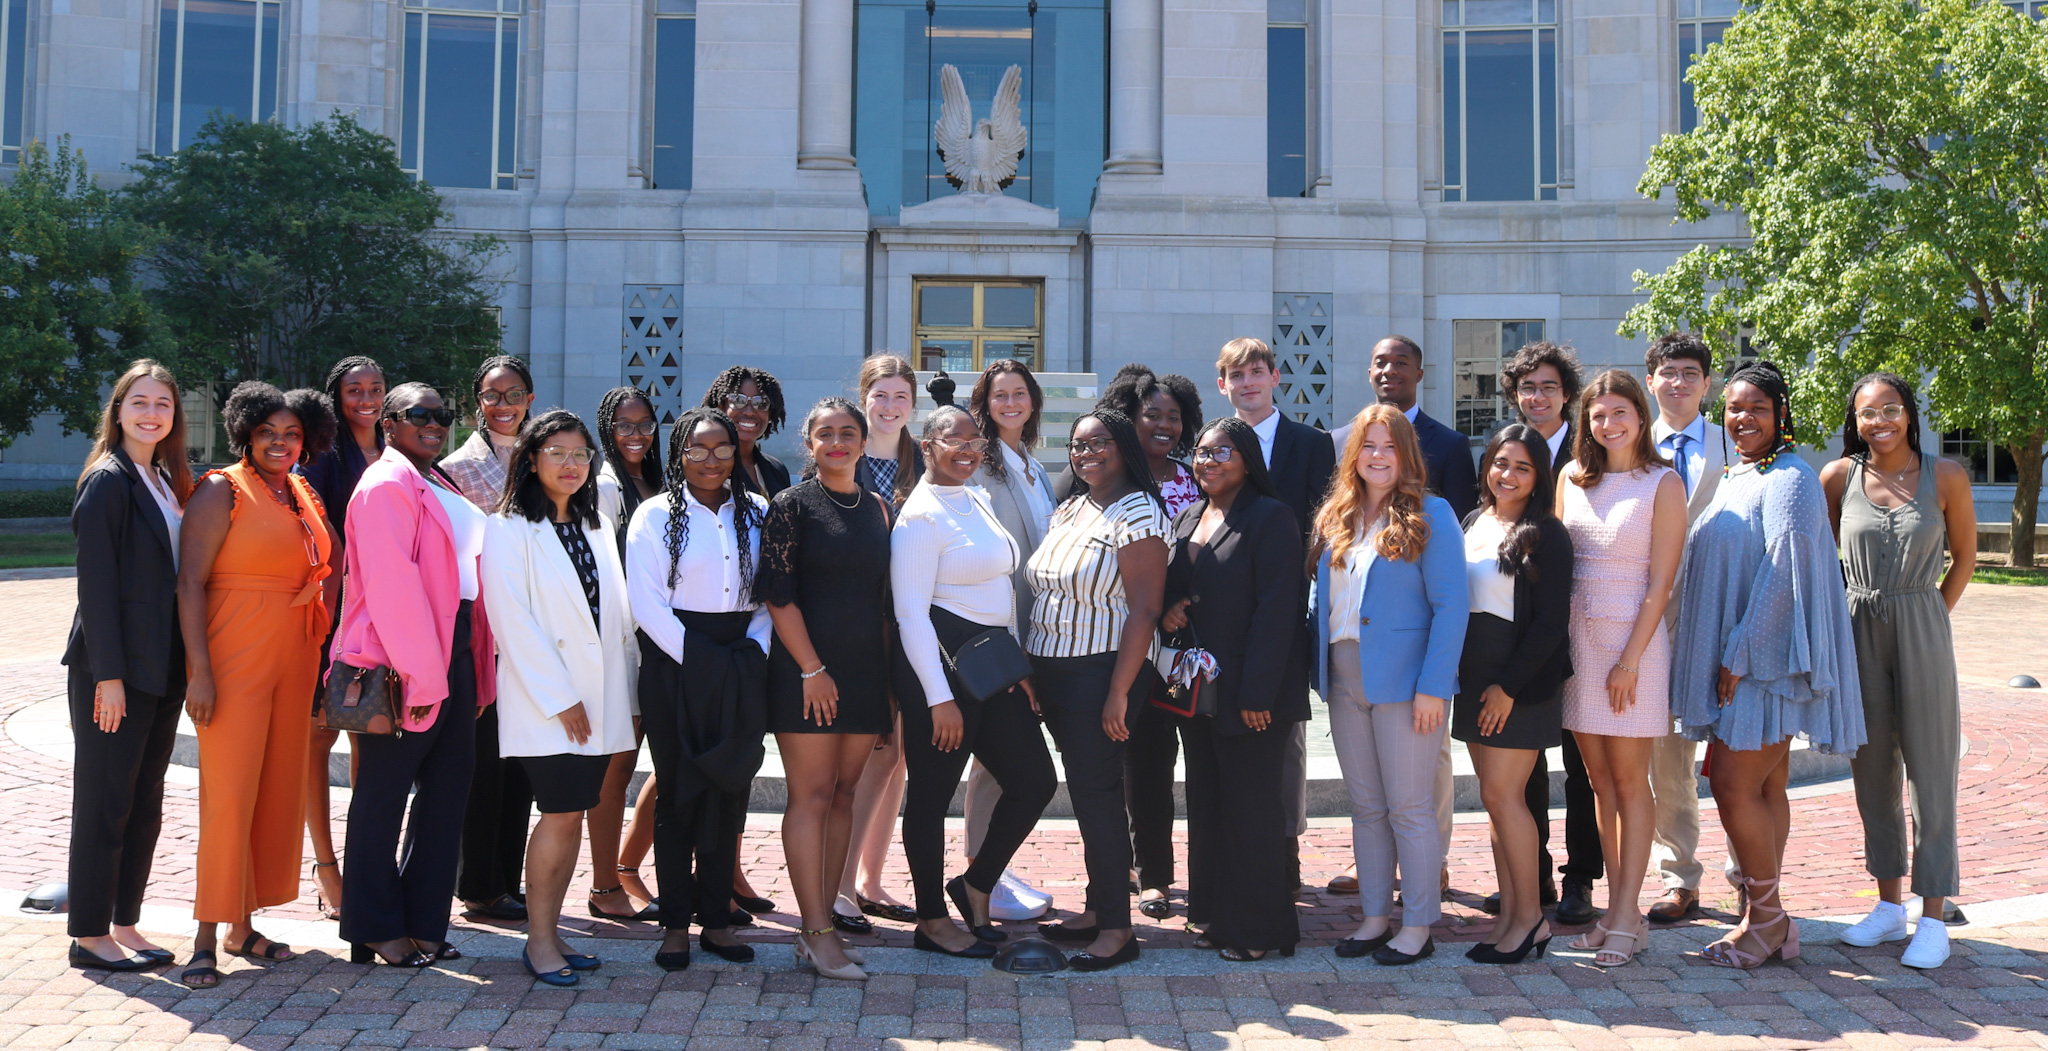 Alabama Law Summer Scholars visit visited the historic federal courthouse for the Middle District of Alabama